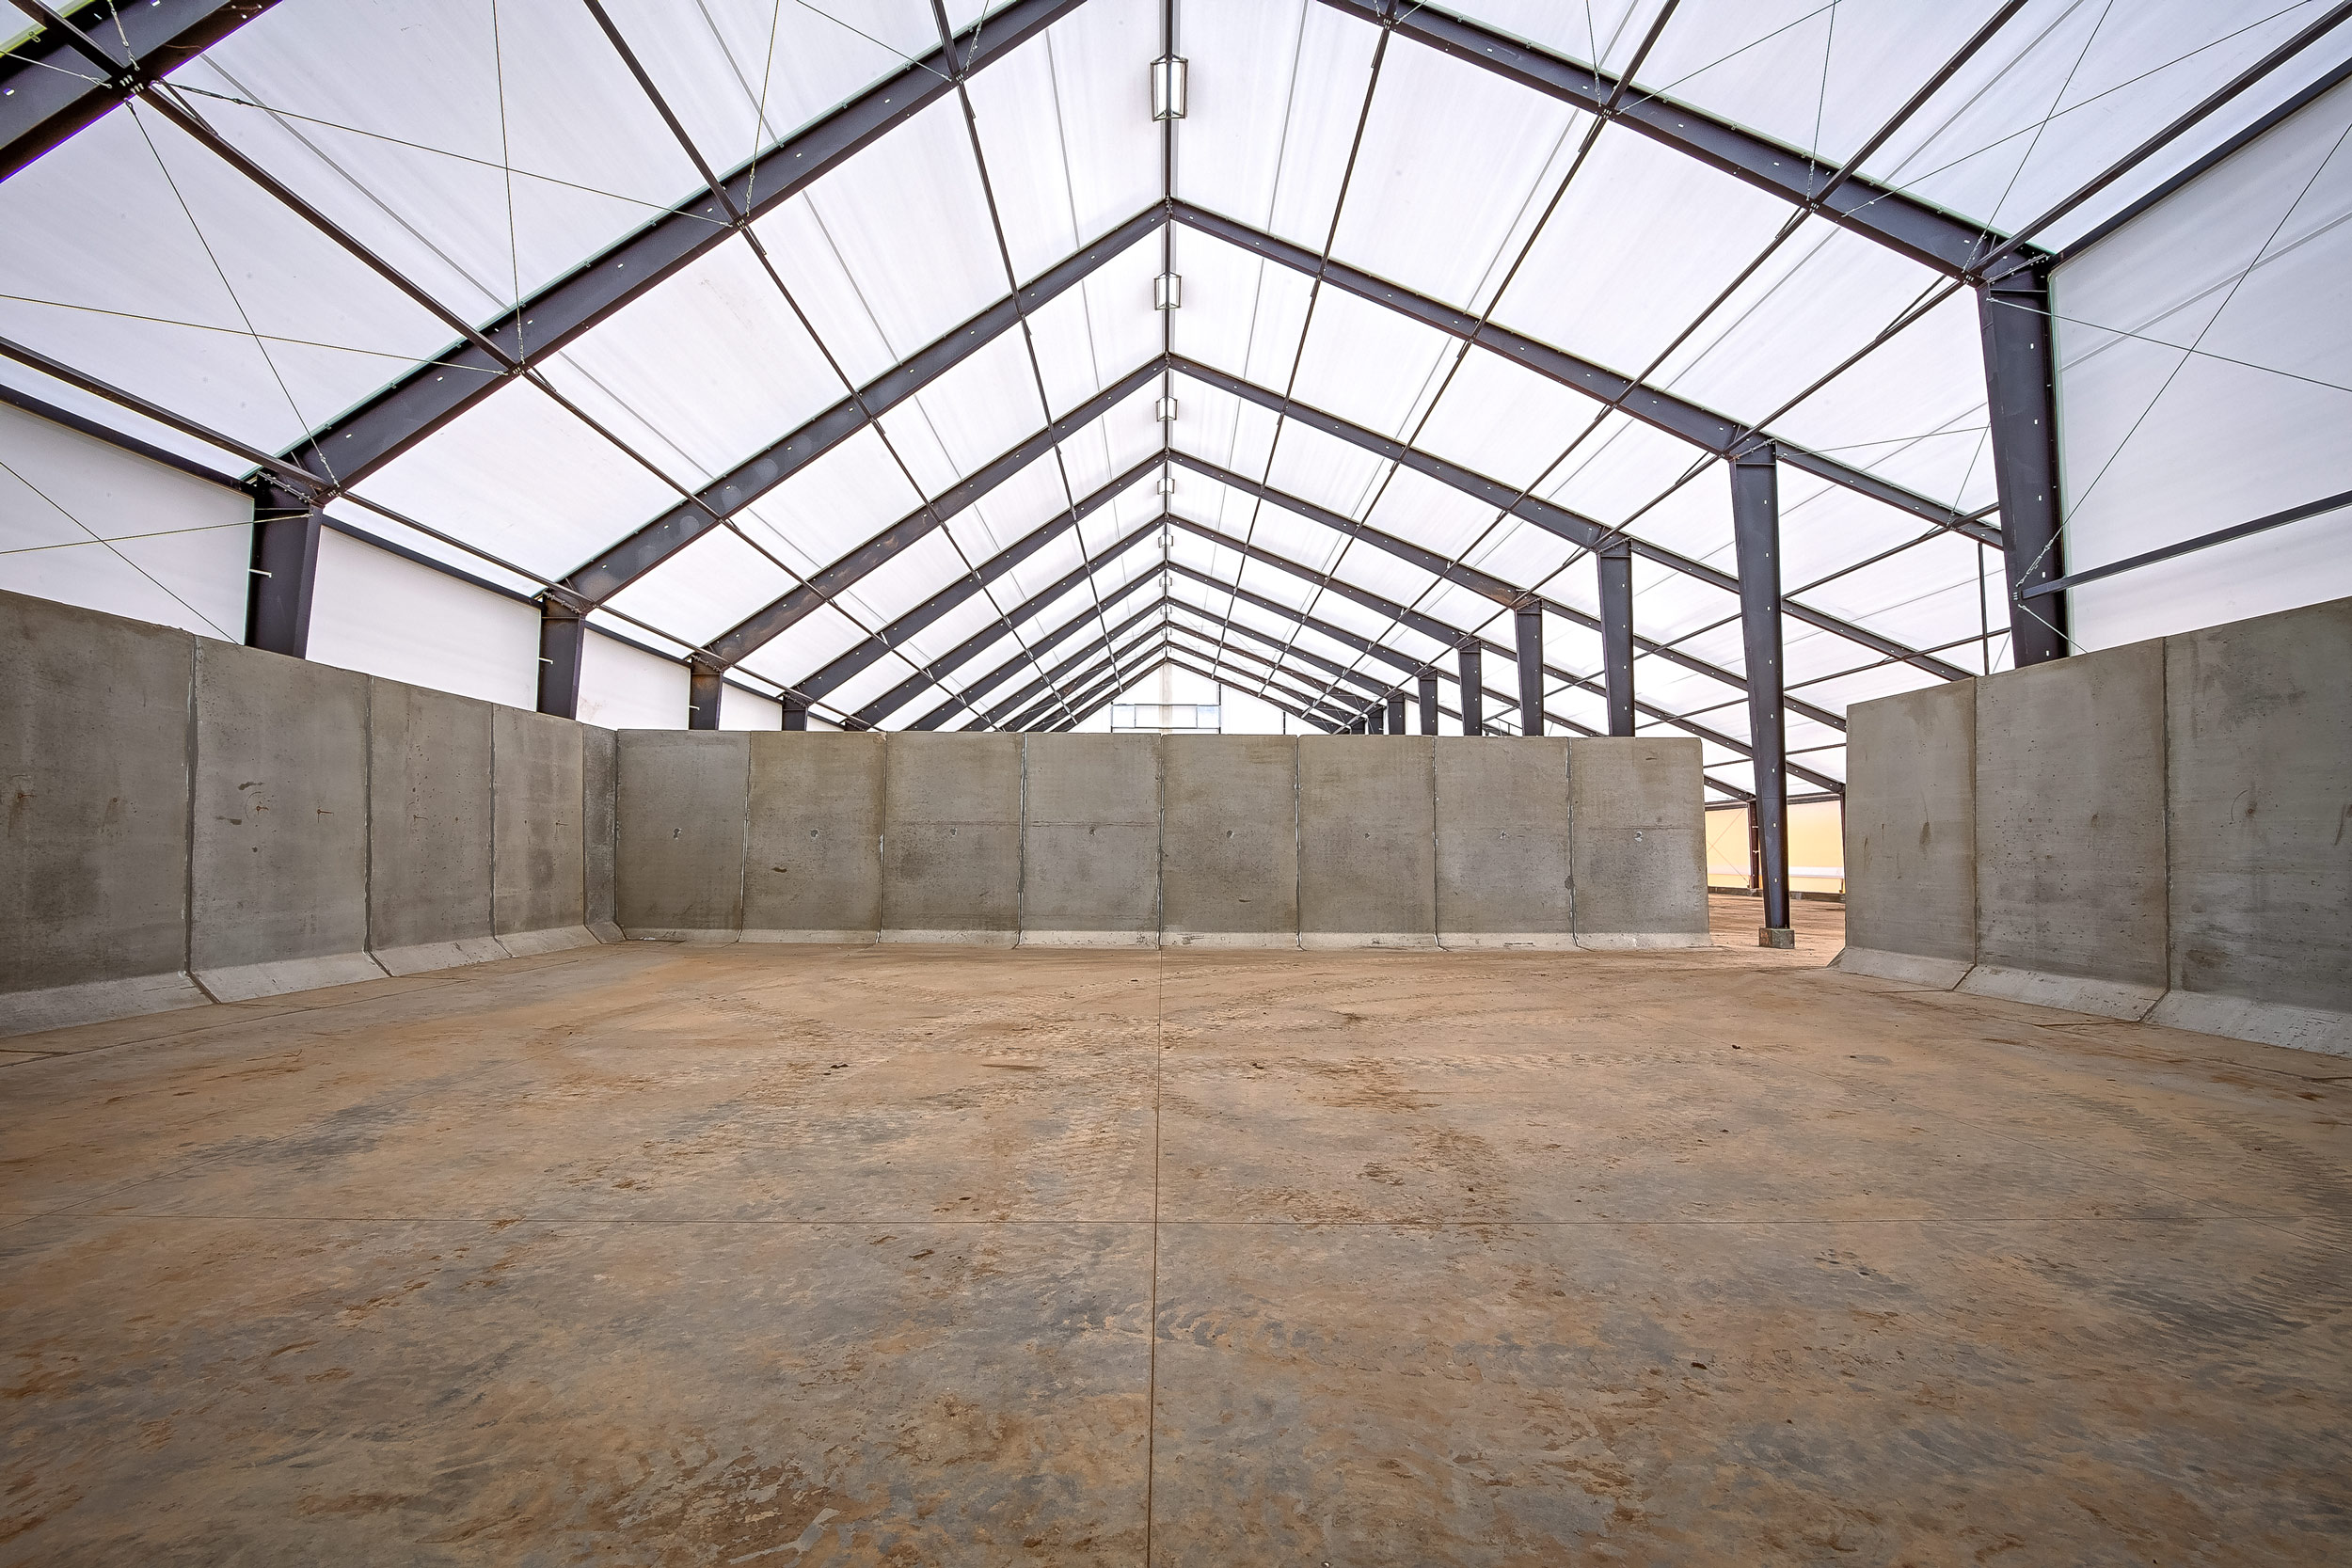 fabric structure with precast panels